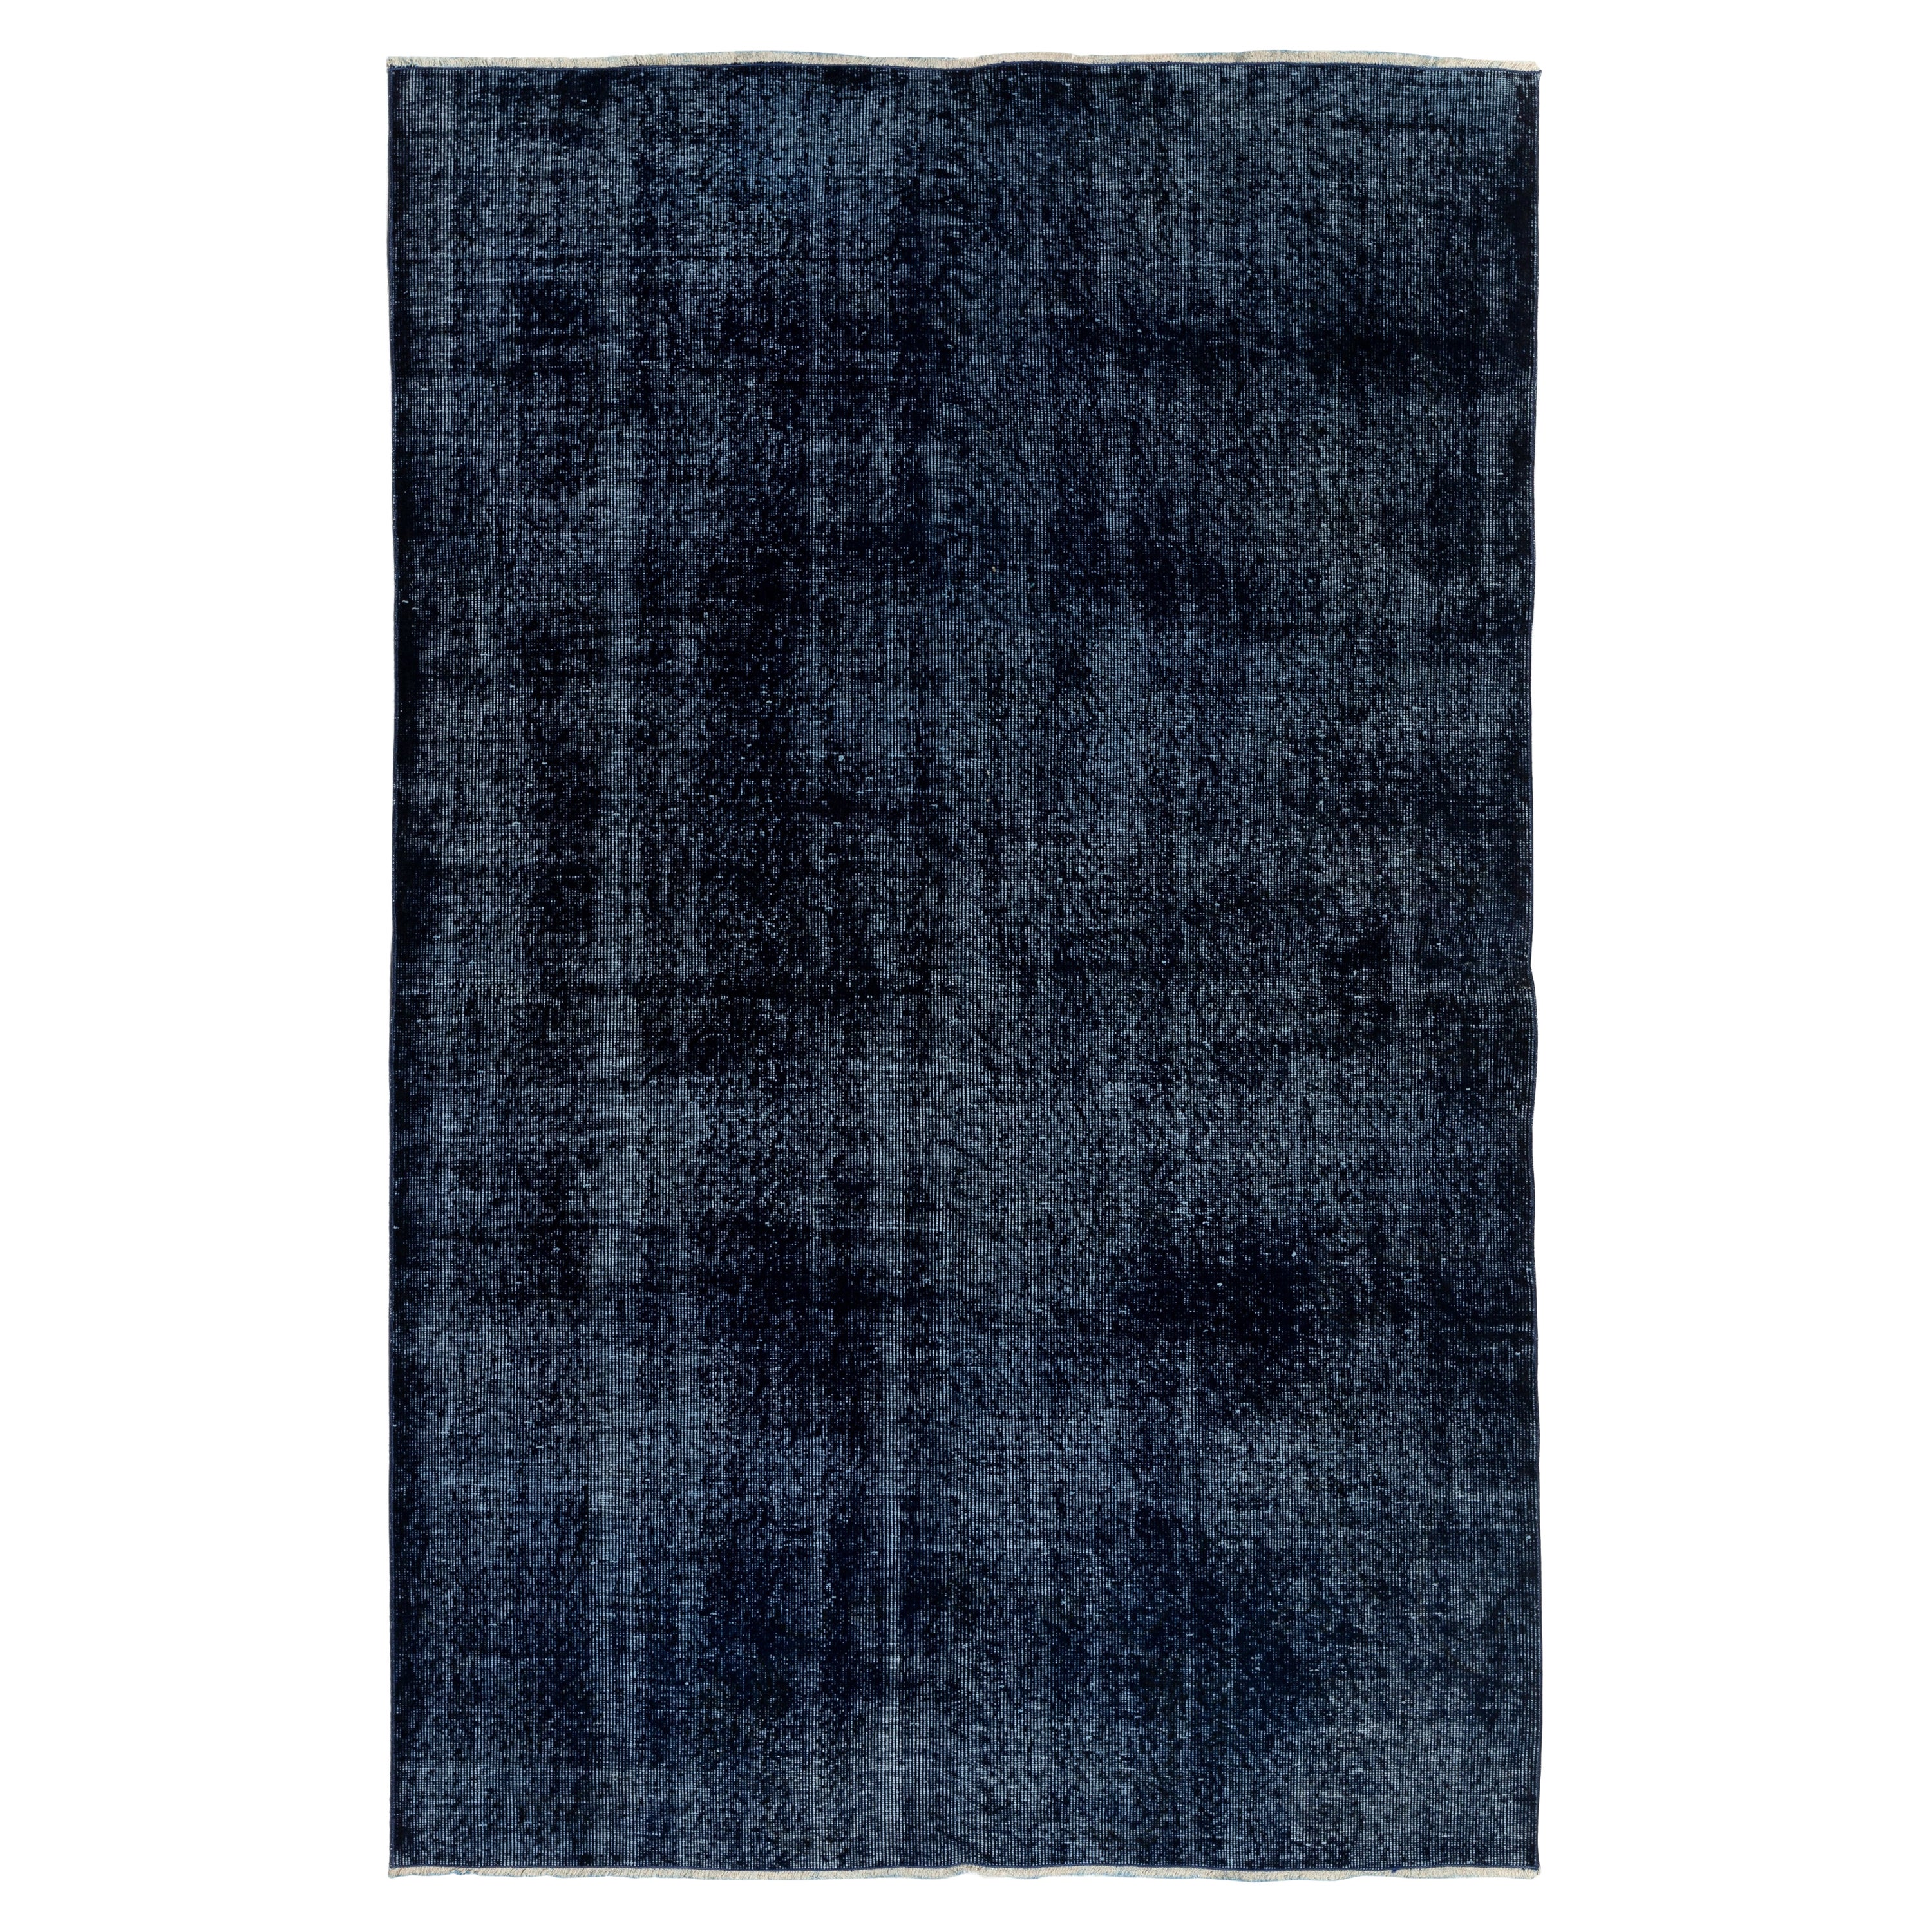 5.5x8.4 Ft Plain Solid Navy Blue Handmade Turkish Rug. Great 4 Modern Interiors For Sale